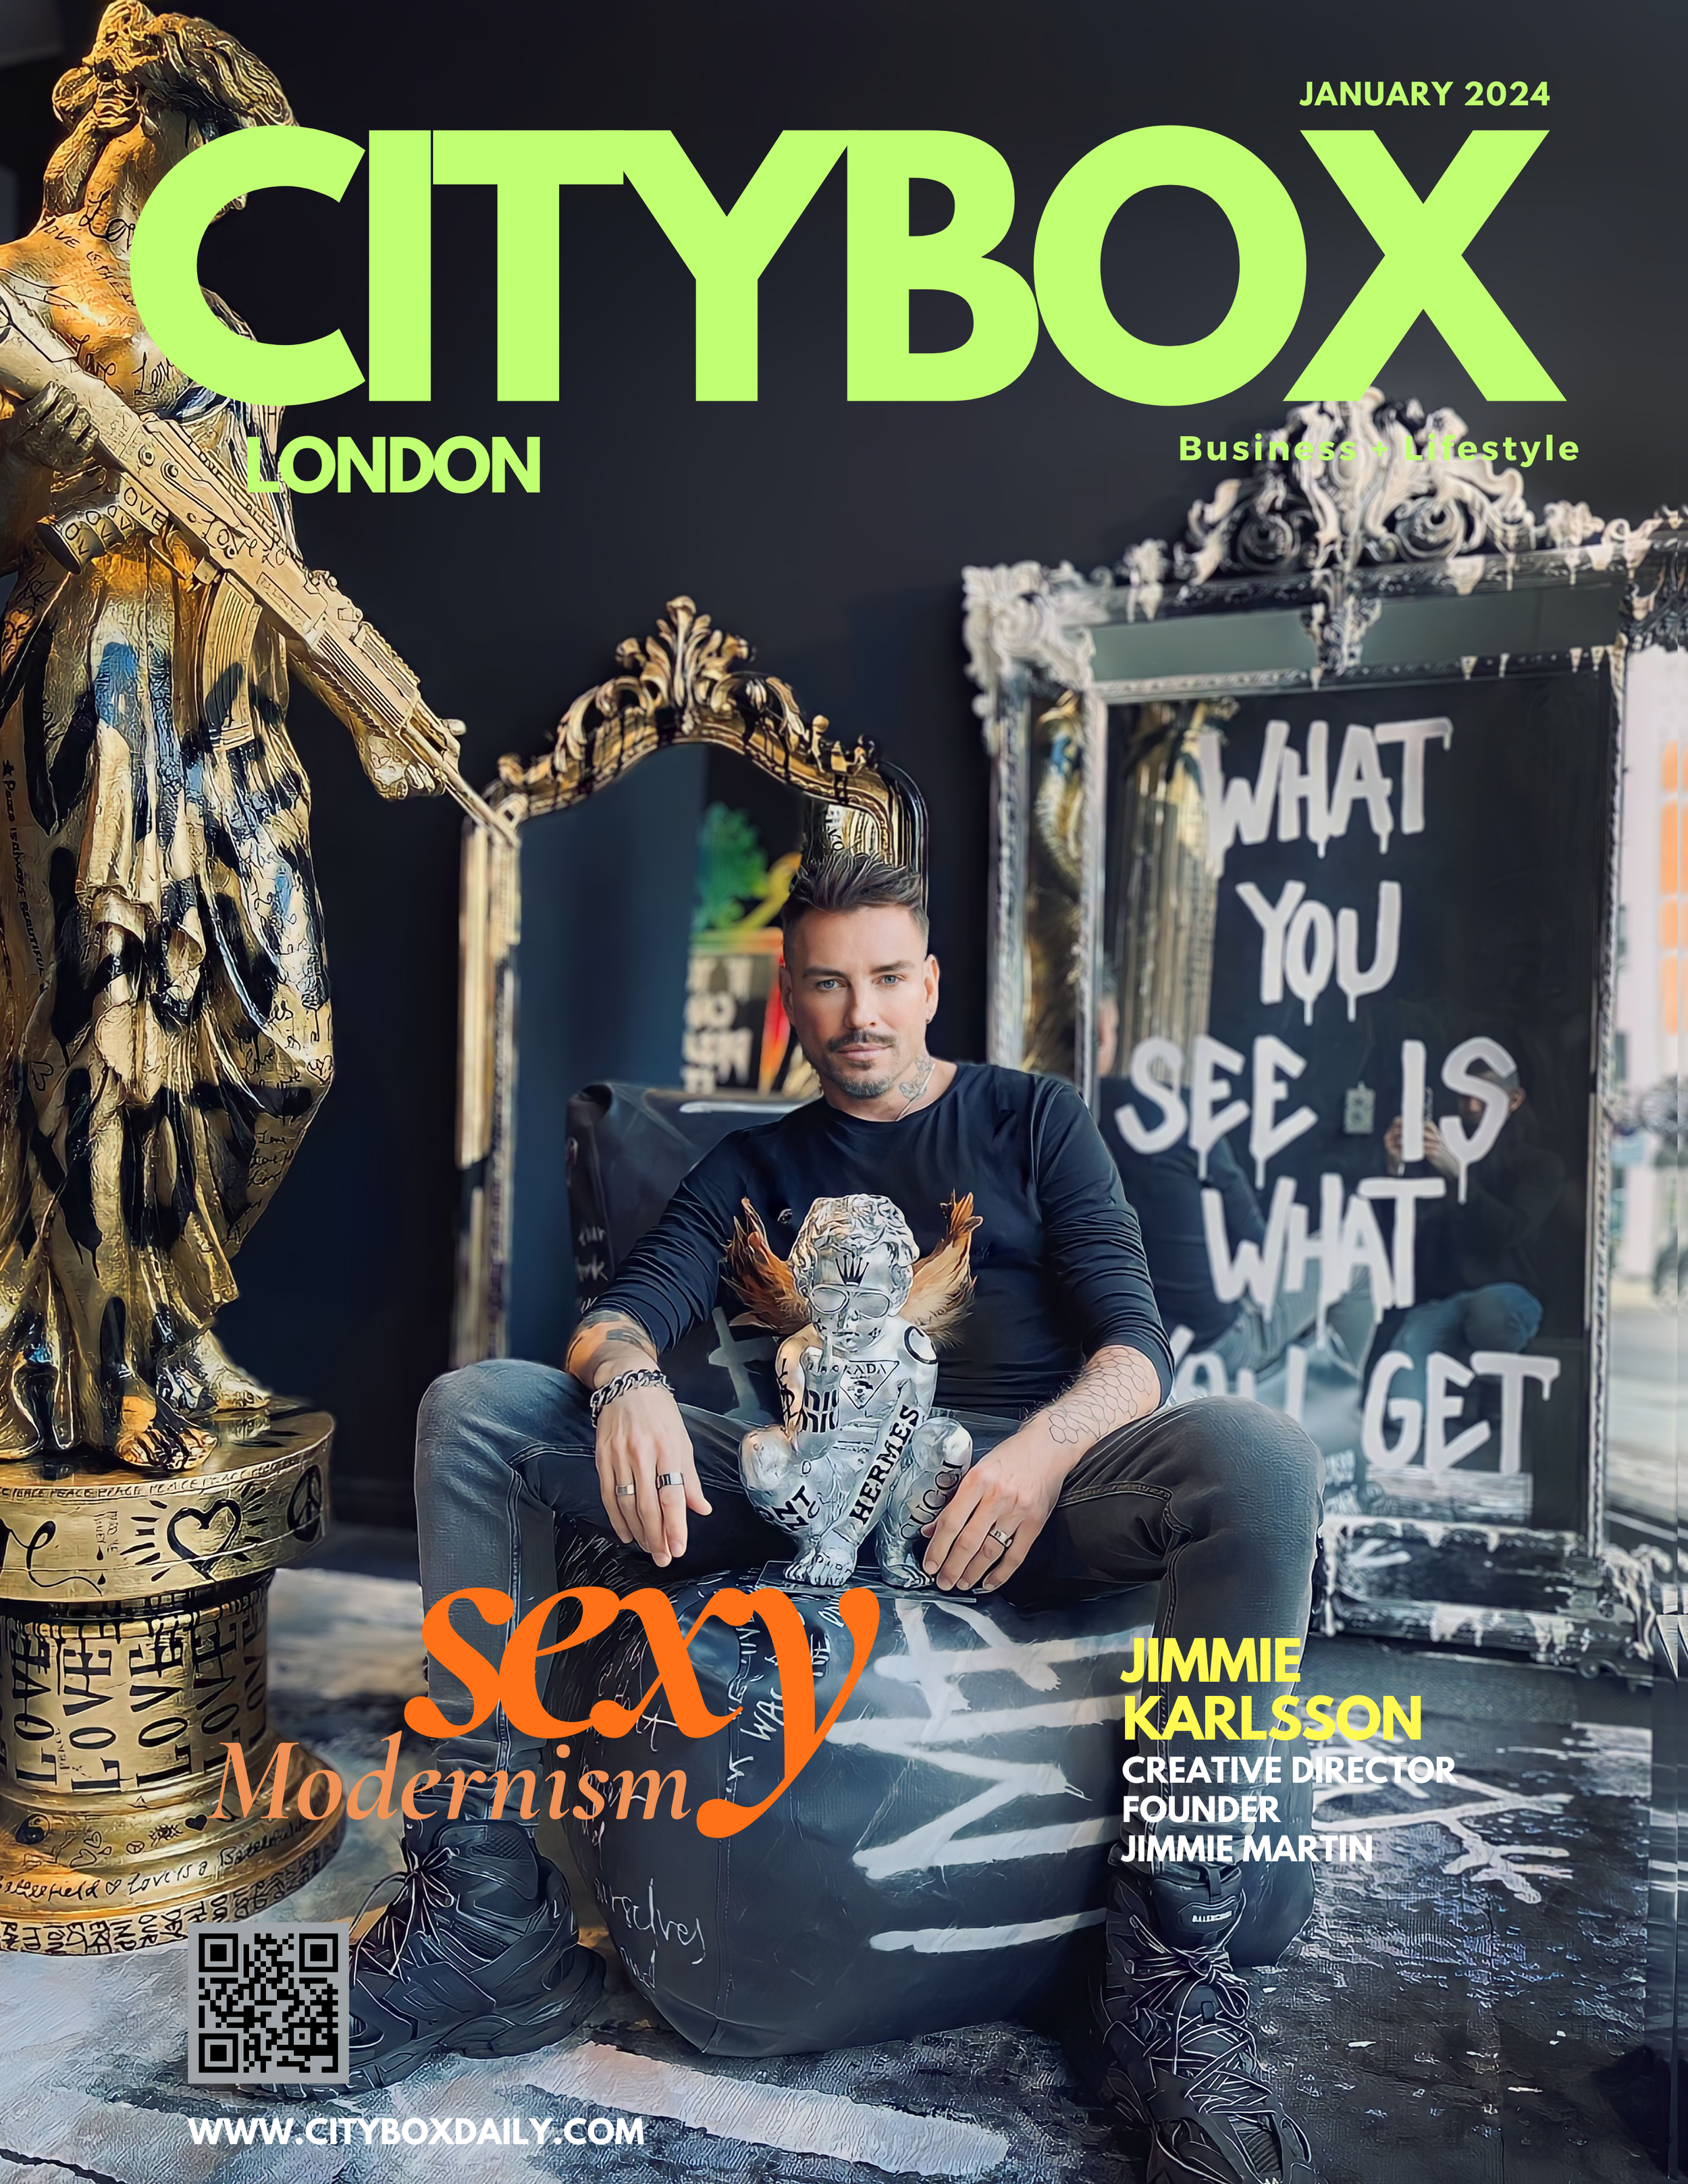 JIMMIE KARLSSON CITYBOX MEDIA MAGAZINE COVER 2024.png